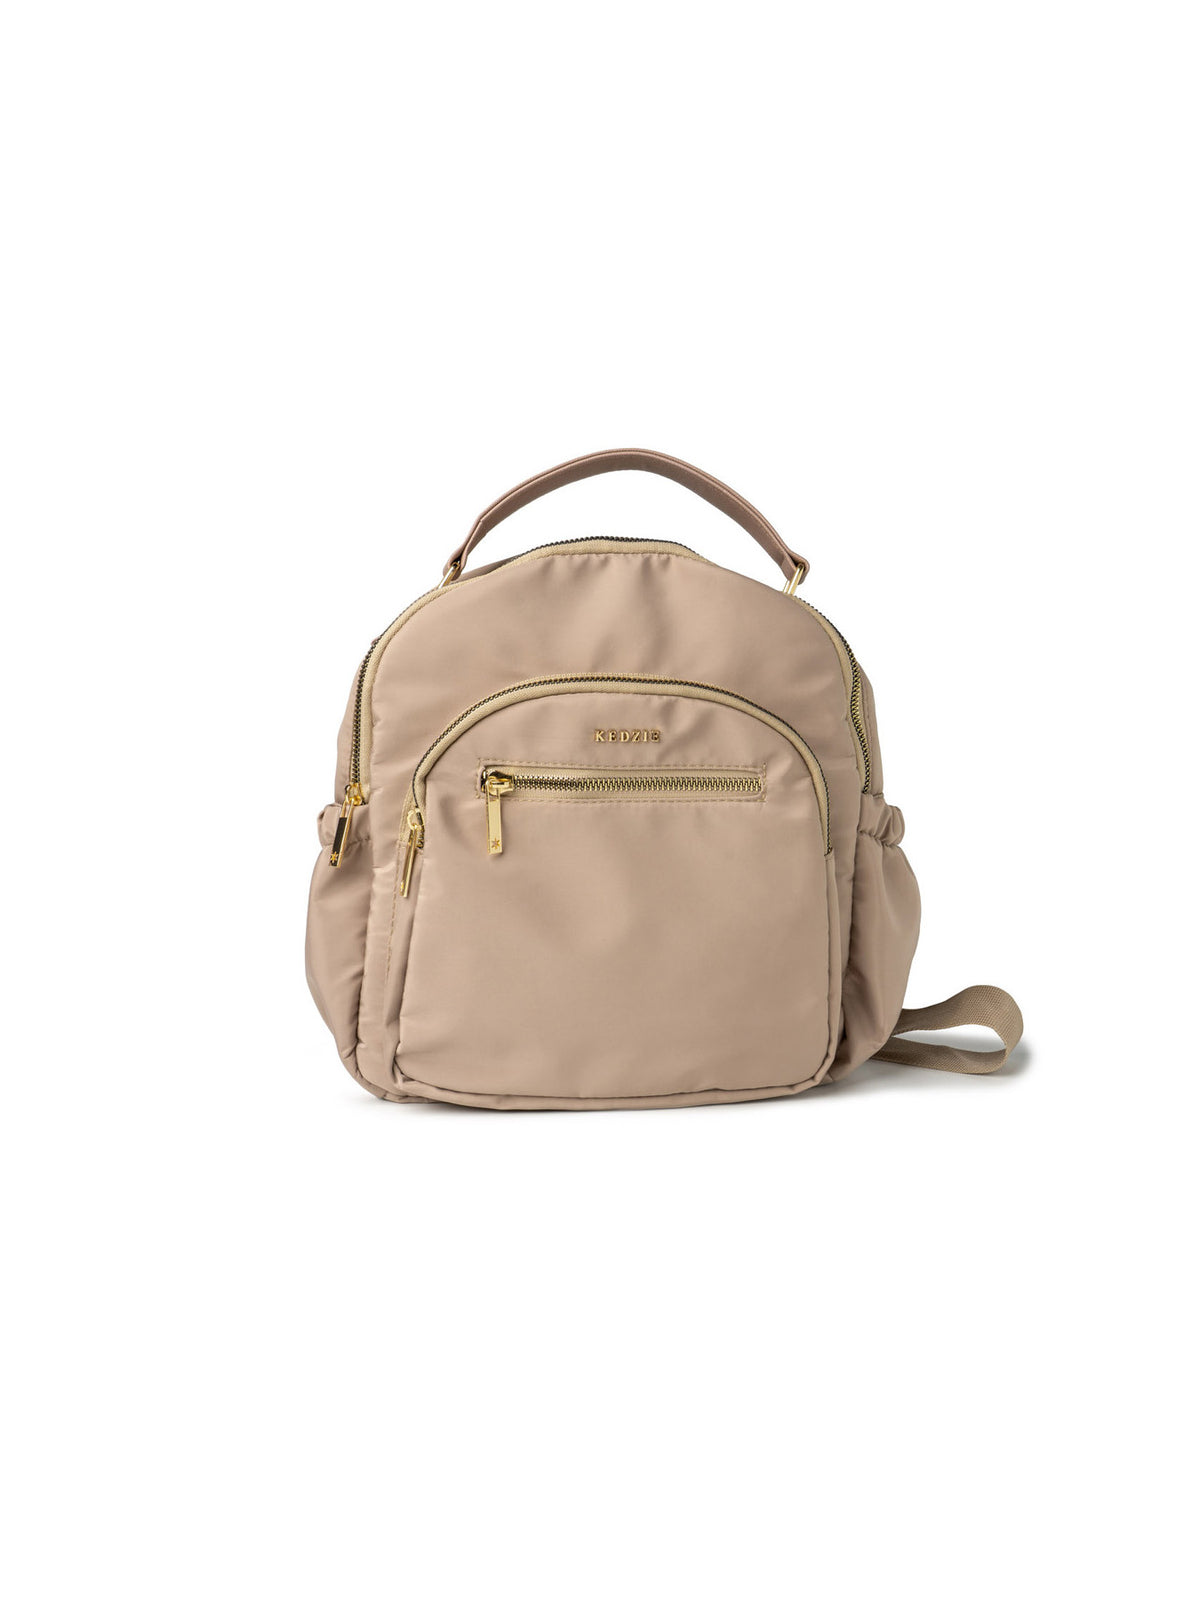 kedzie aire convertible backpack in taupe